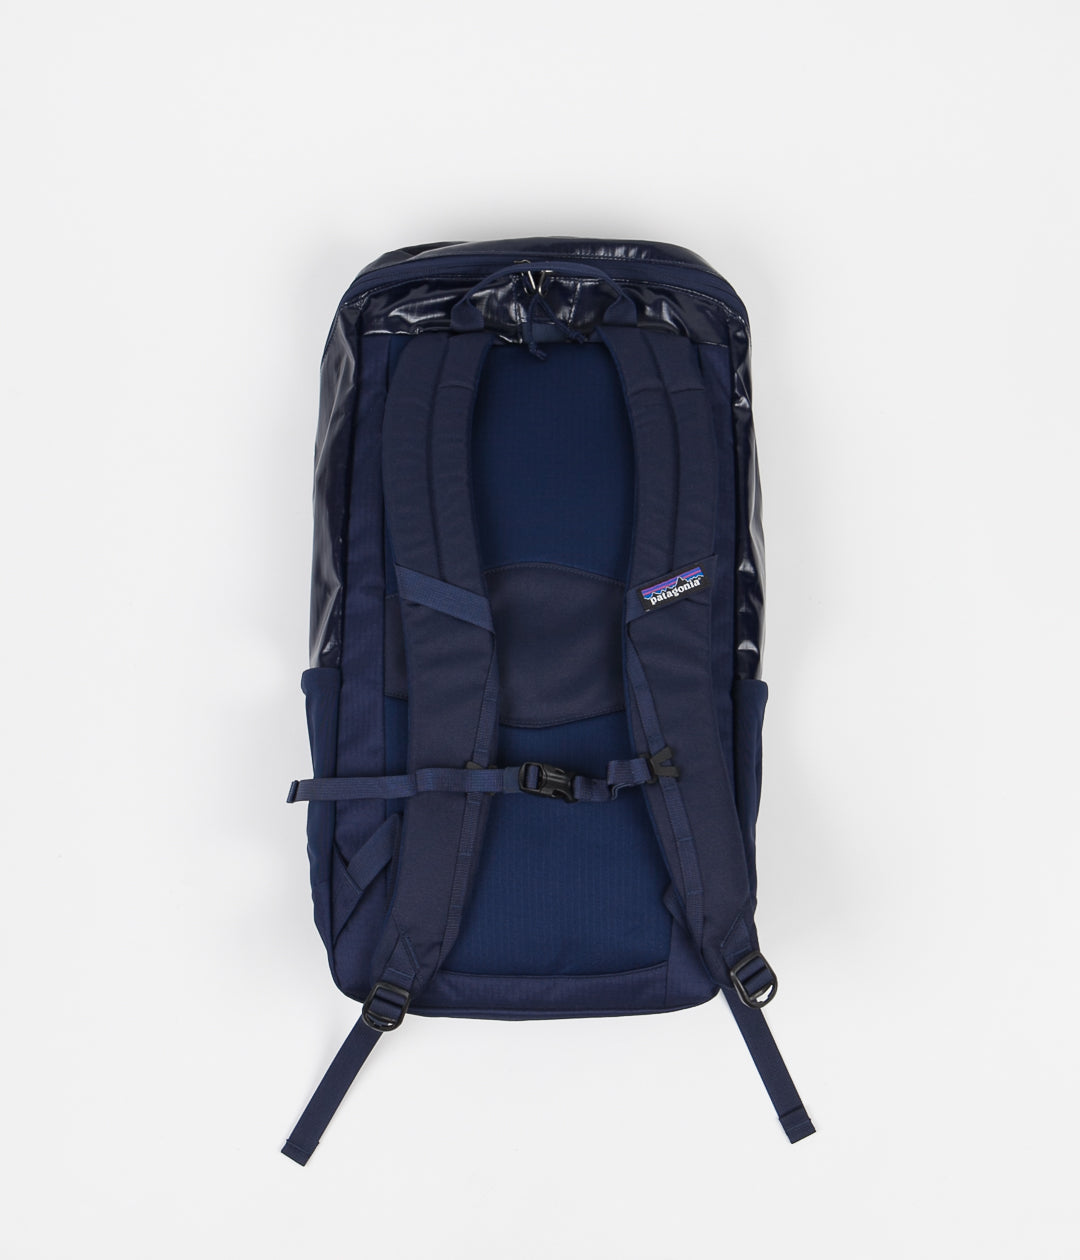 Patagonia Black Hole Gear Tote Bag 61L Review | Field Mag